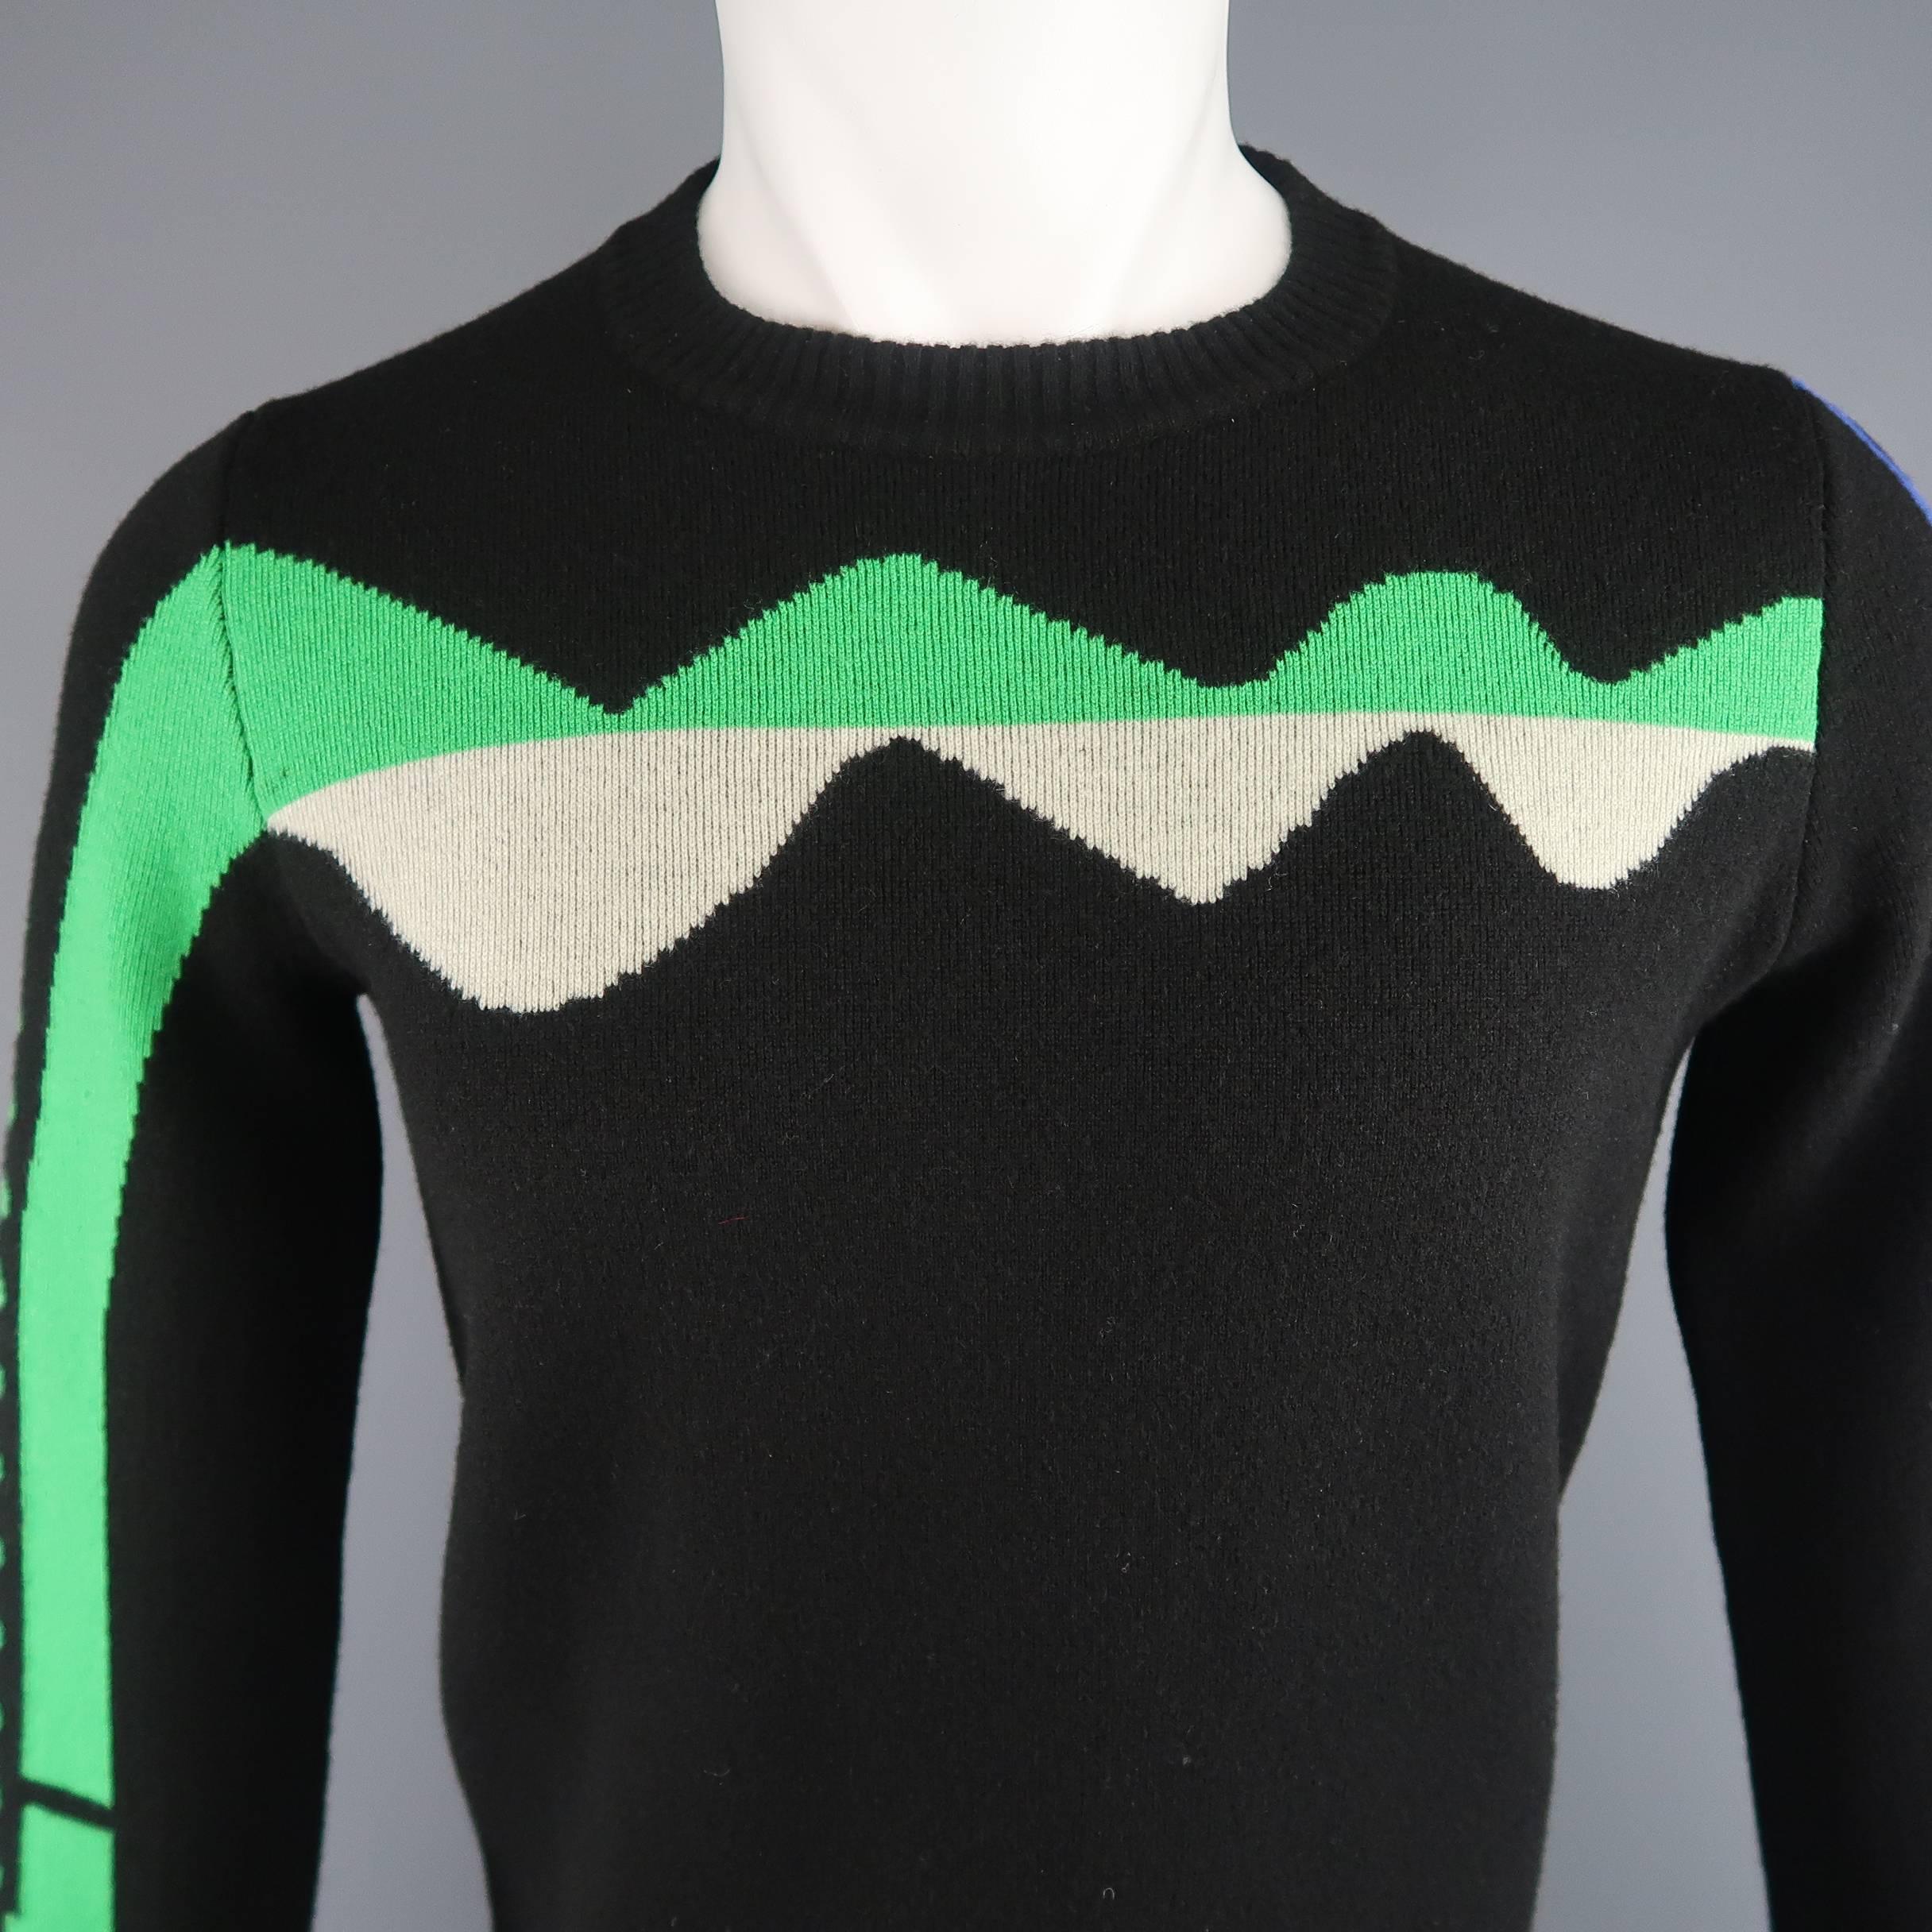 JIL SANDER pullover sweater comes in black cashmere with a ribbed crewneck and color block zigzag print in cream, green, and blue. Made in Italy.
 
Good Pre-Owned Condition.
Marked: IT 40
 
Measurements:
 
Shoulder: 15 in.
Chest: 38 in.
Sleeve: 27